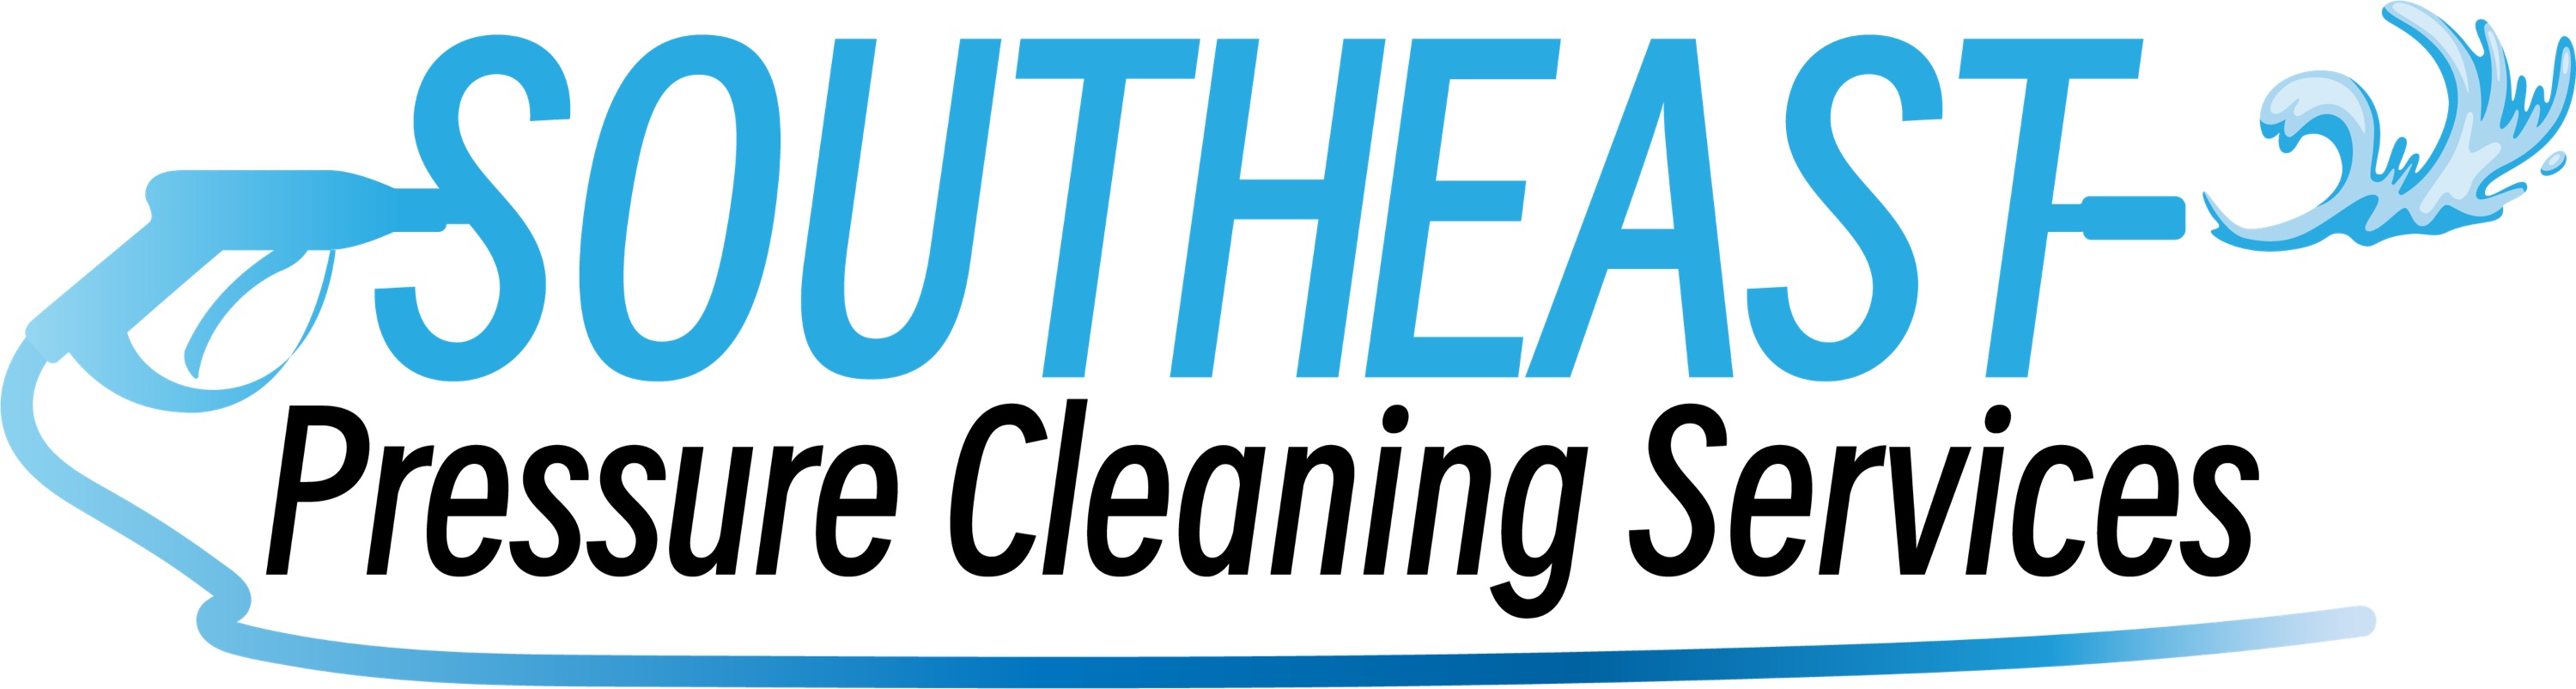 Southeast Pressure Cleaning Services Logo